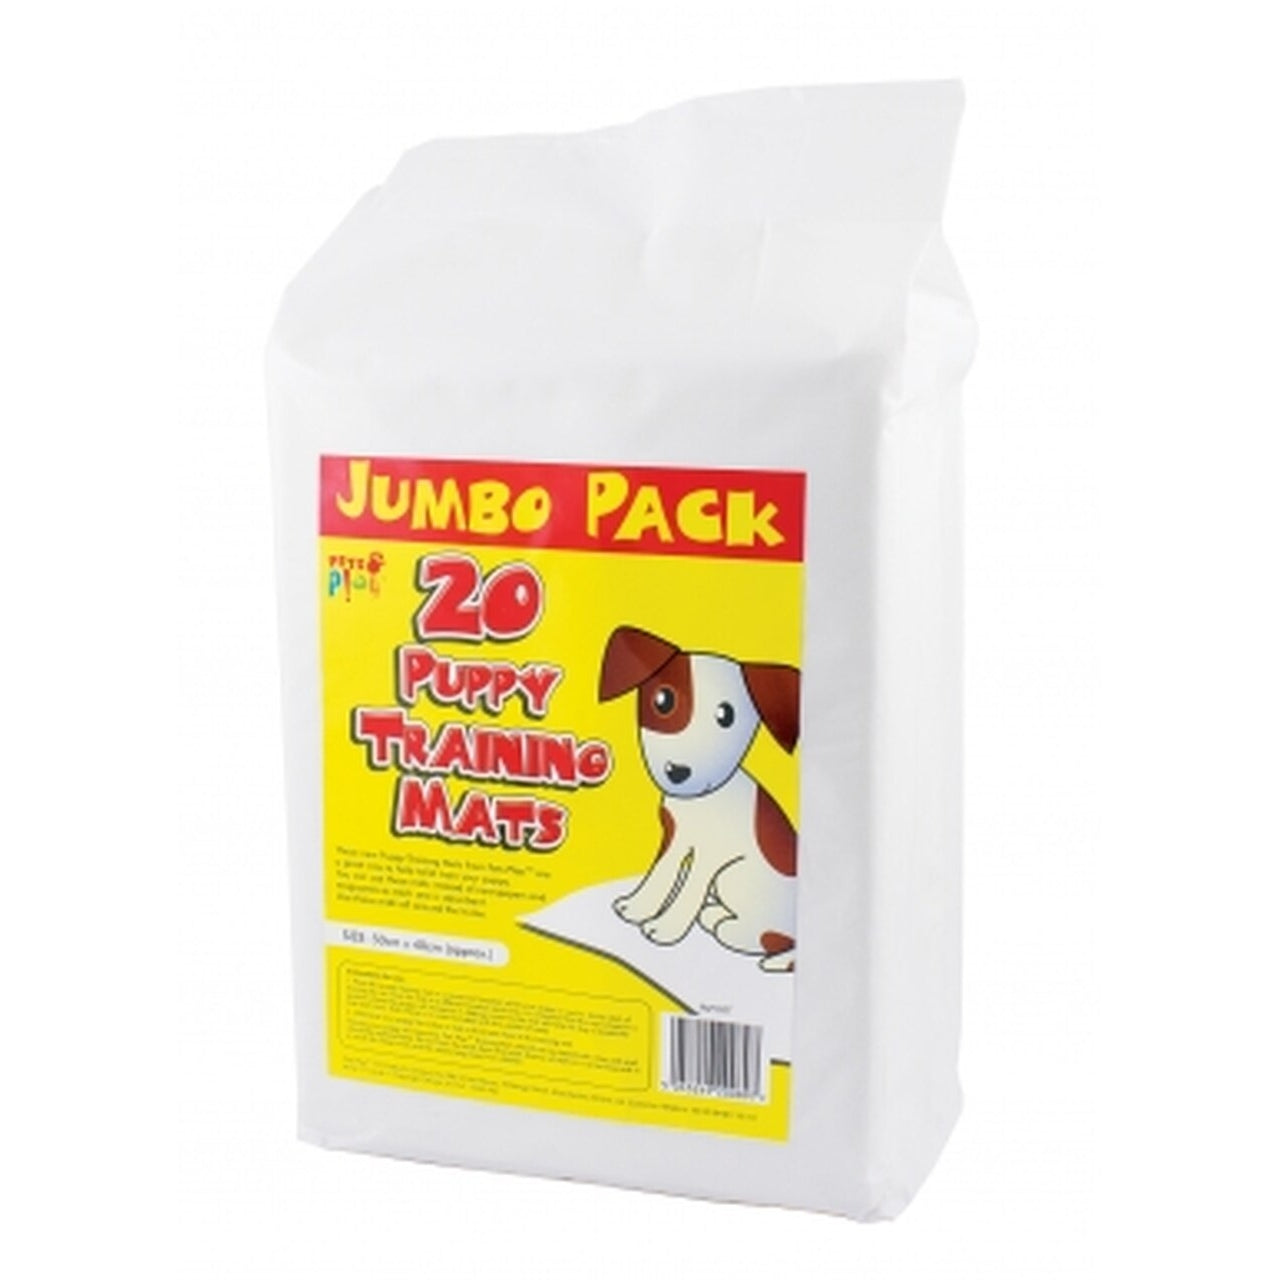 Pack of 20 Puppy Training Mats